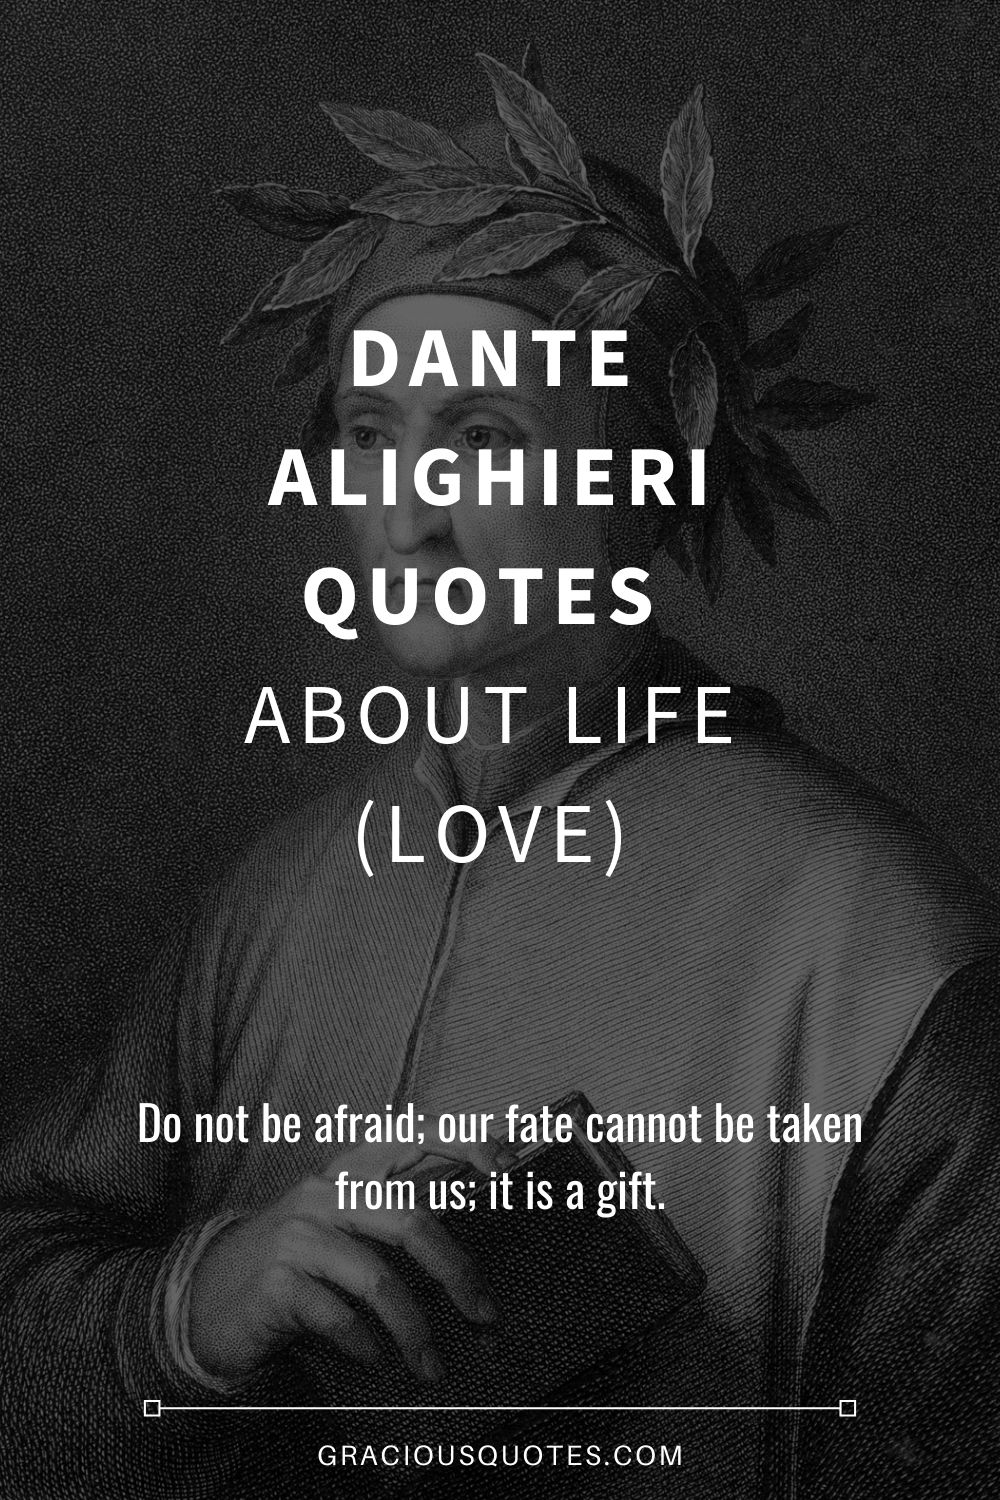 x  Quotes on X: “The path to paradise begins in hell.” - Dante